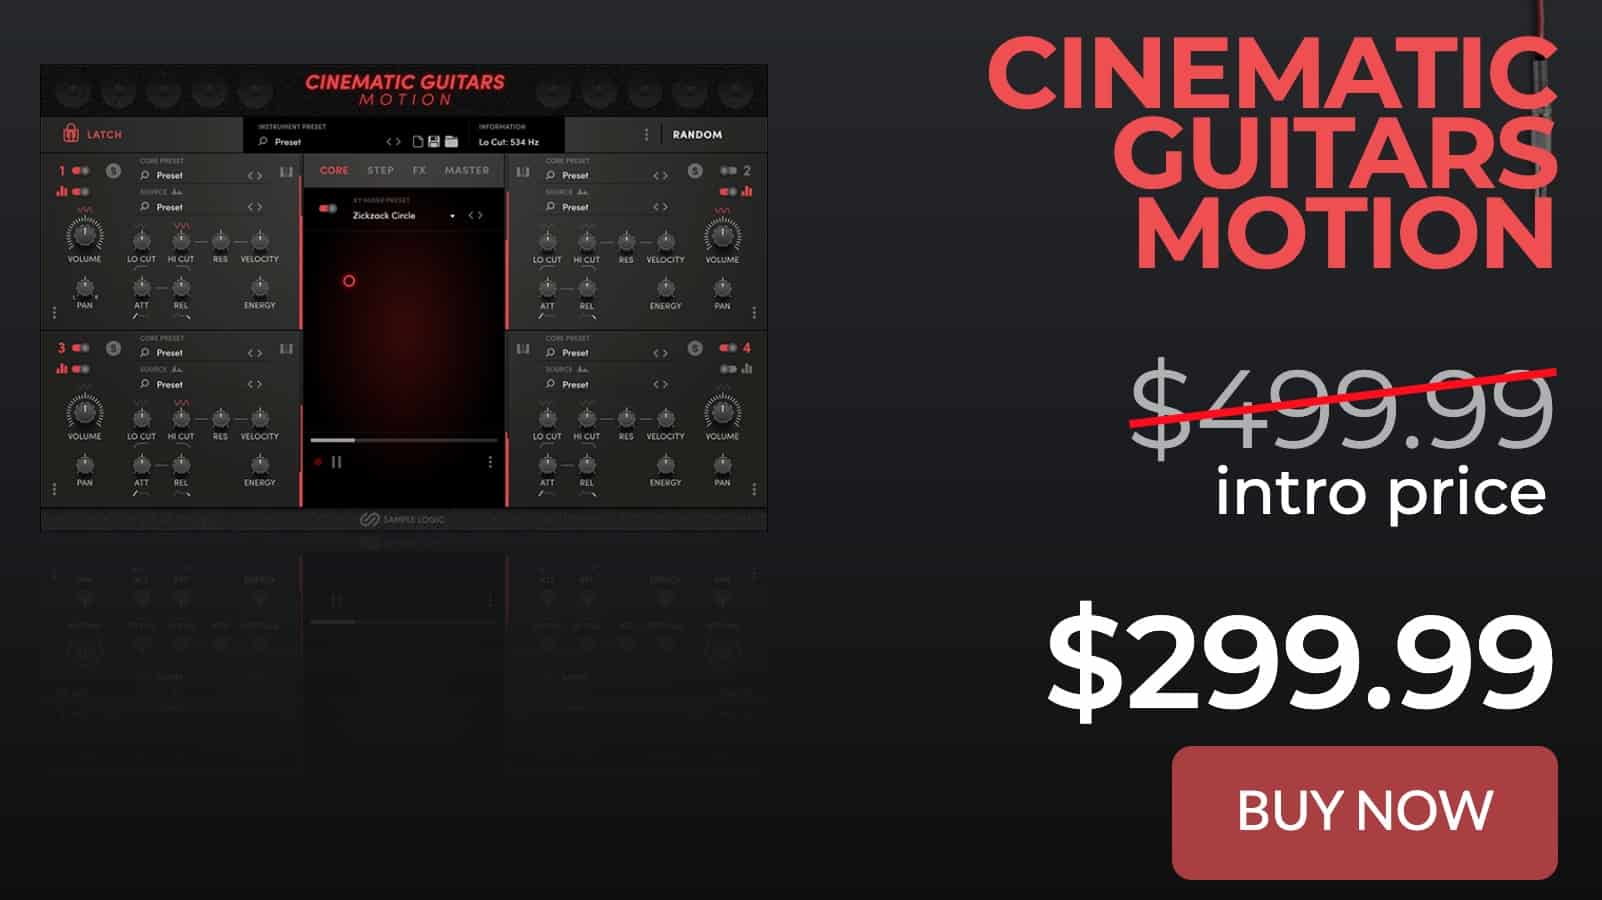 One More Week To Save 200 USD On Intro Price Cinematic Guitars Motion